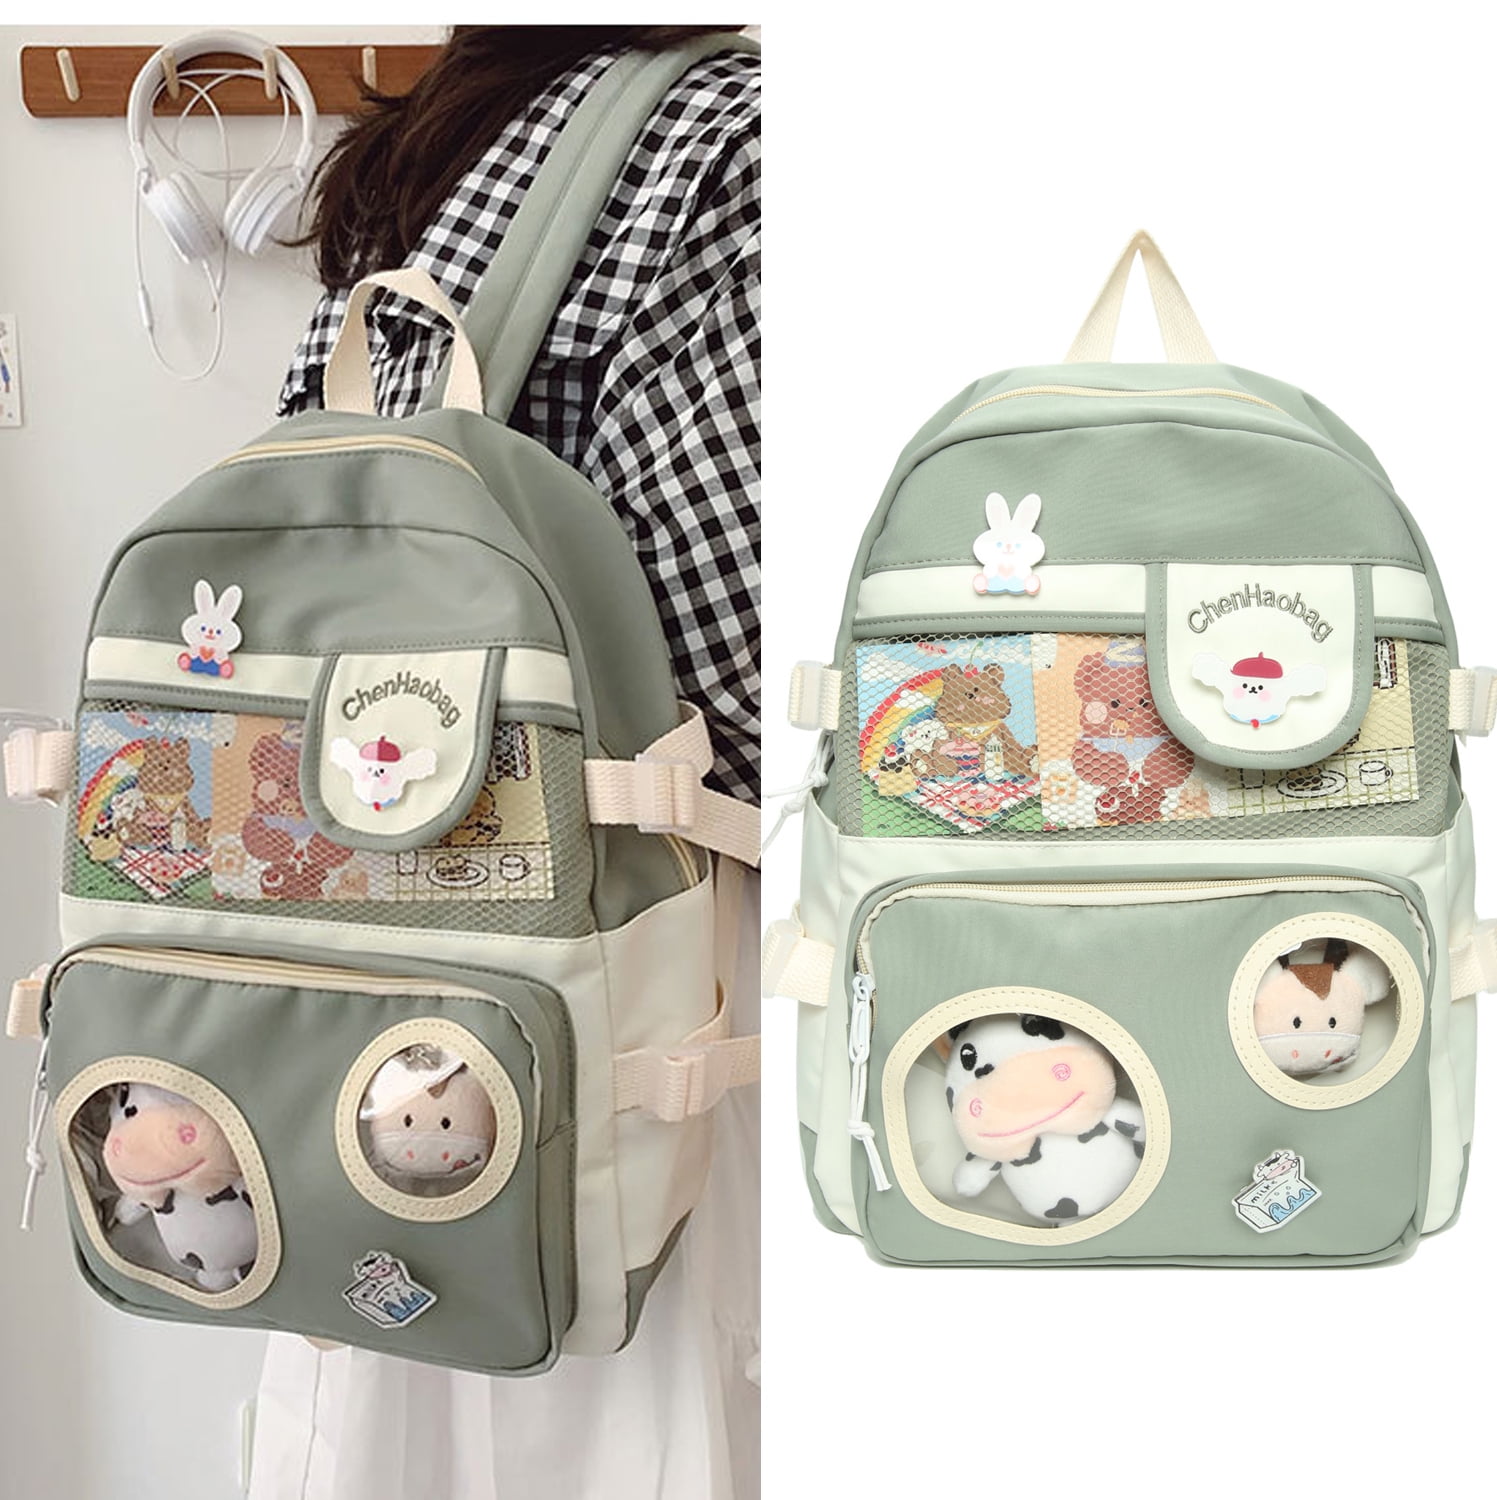 Kawaii Backpack For School Cute Aesthetic Kids Elementary Kindergarten With  Kawaii Pin And Accessories Chains Mochilas Escolares Para Niñas Toddler